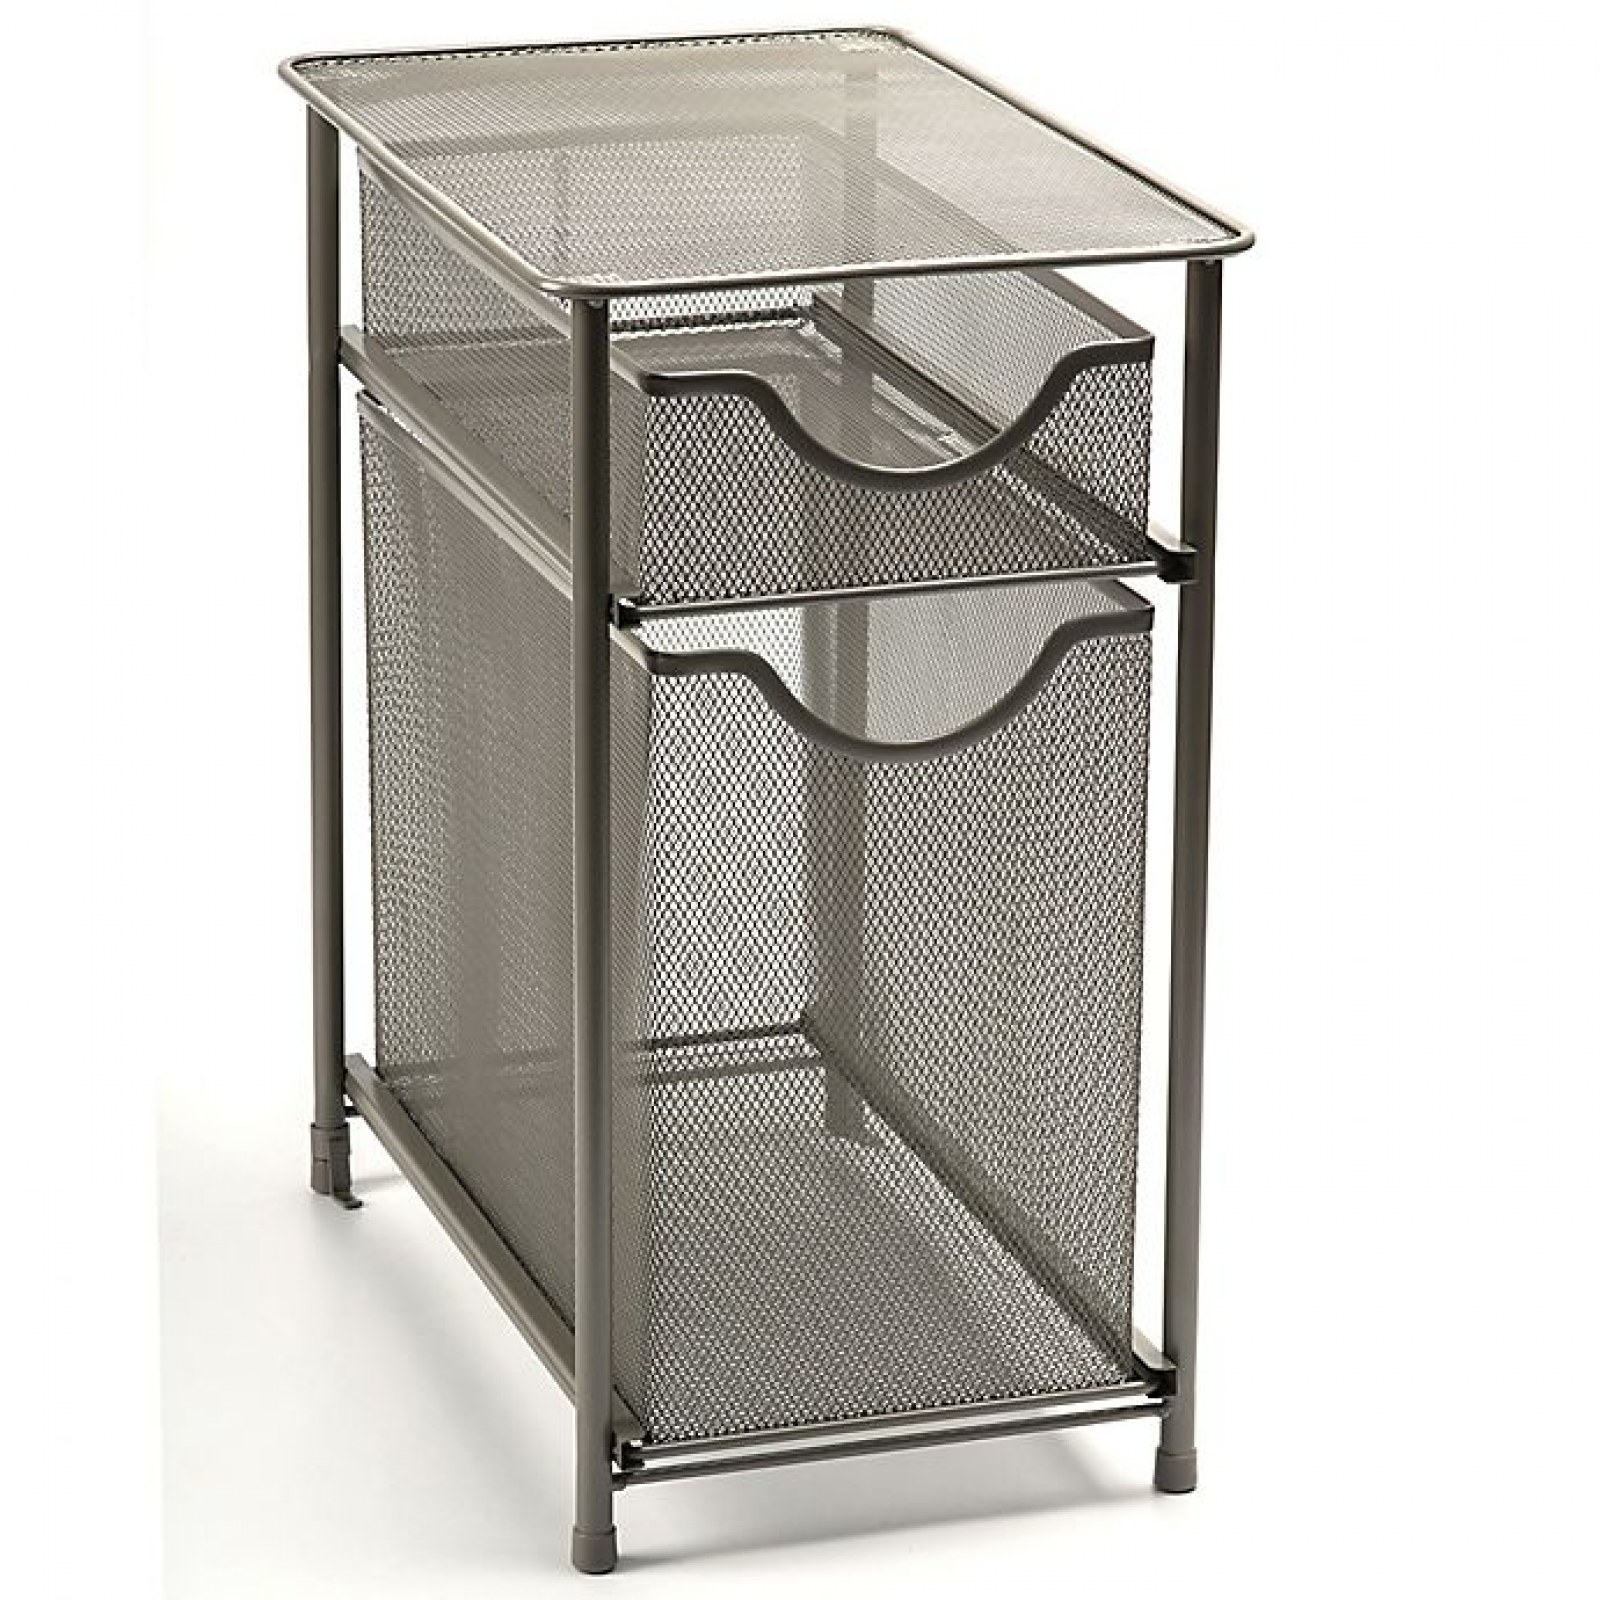 Should You Buy? PUILUO 2 Tier Sliding Organizer Drawer 